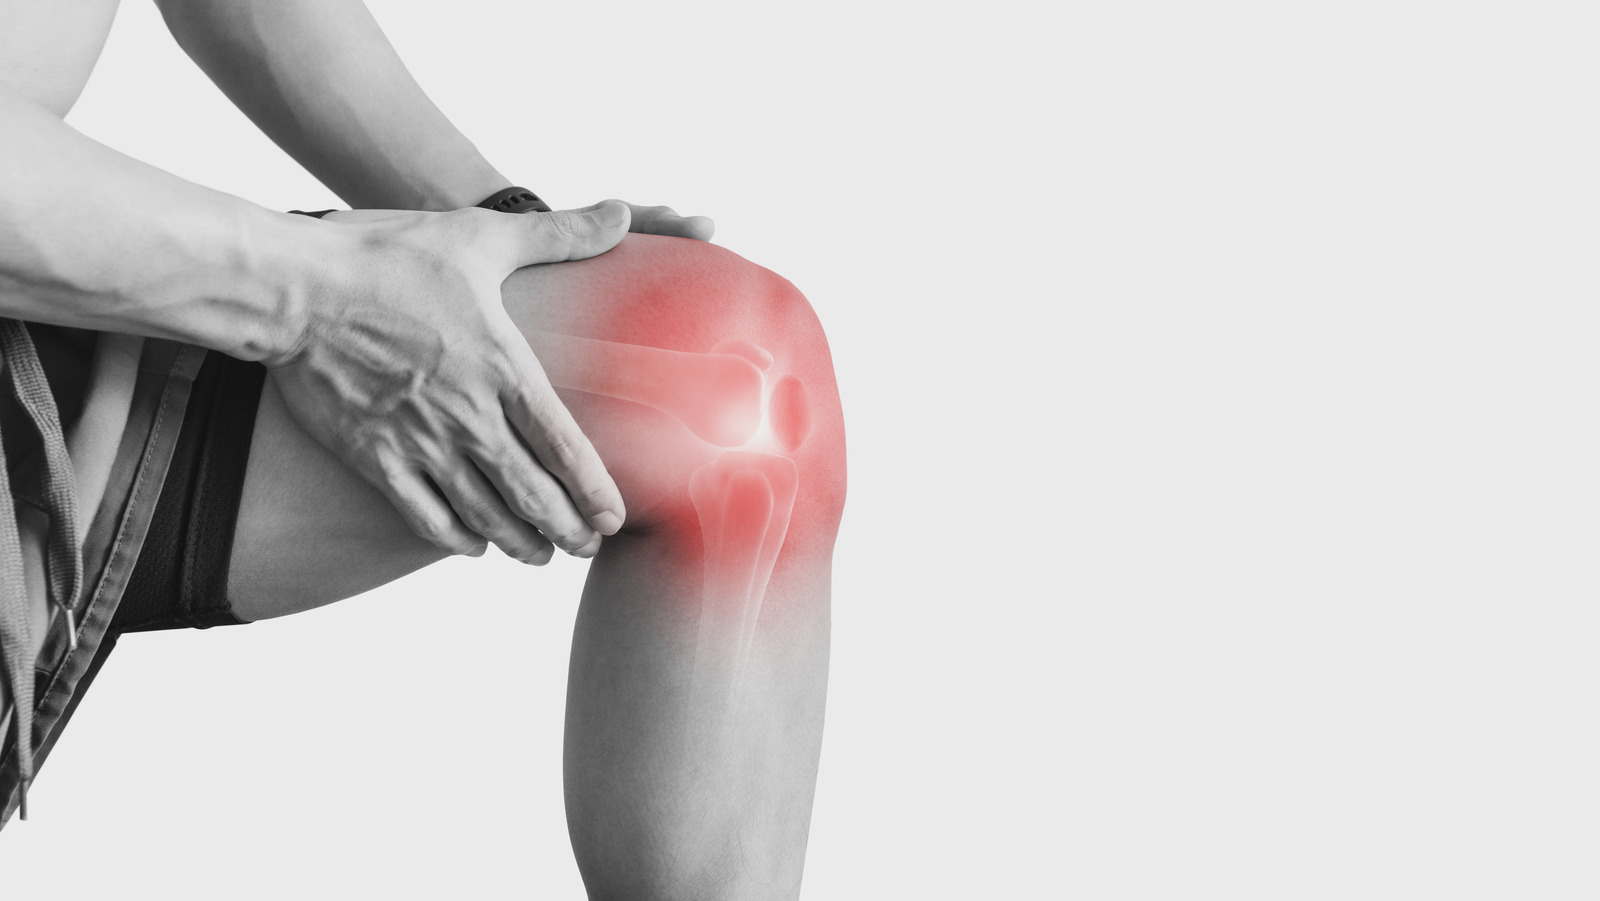 How to manage arthritis pain